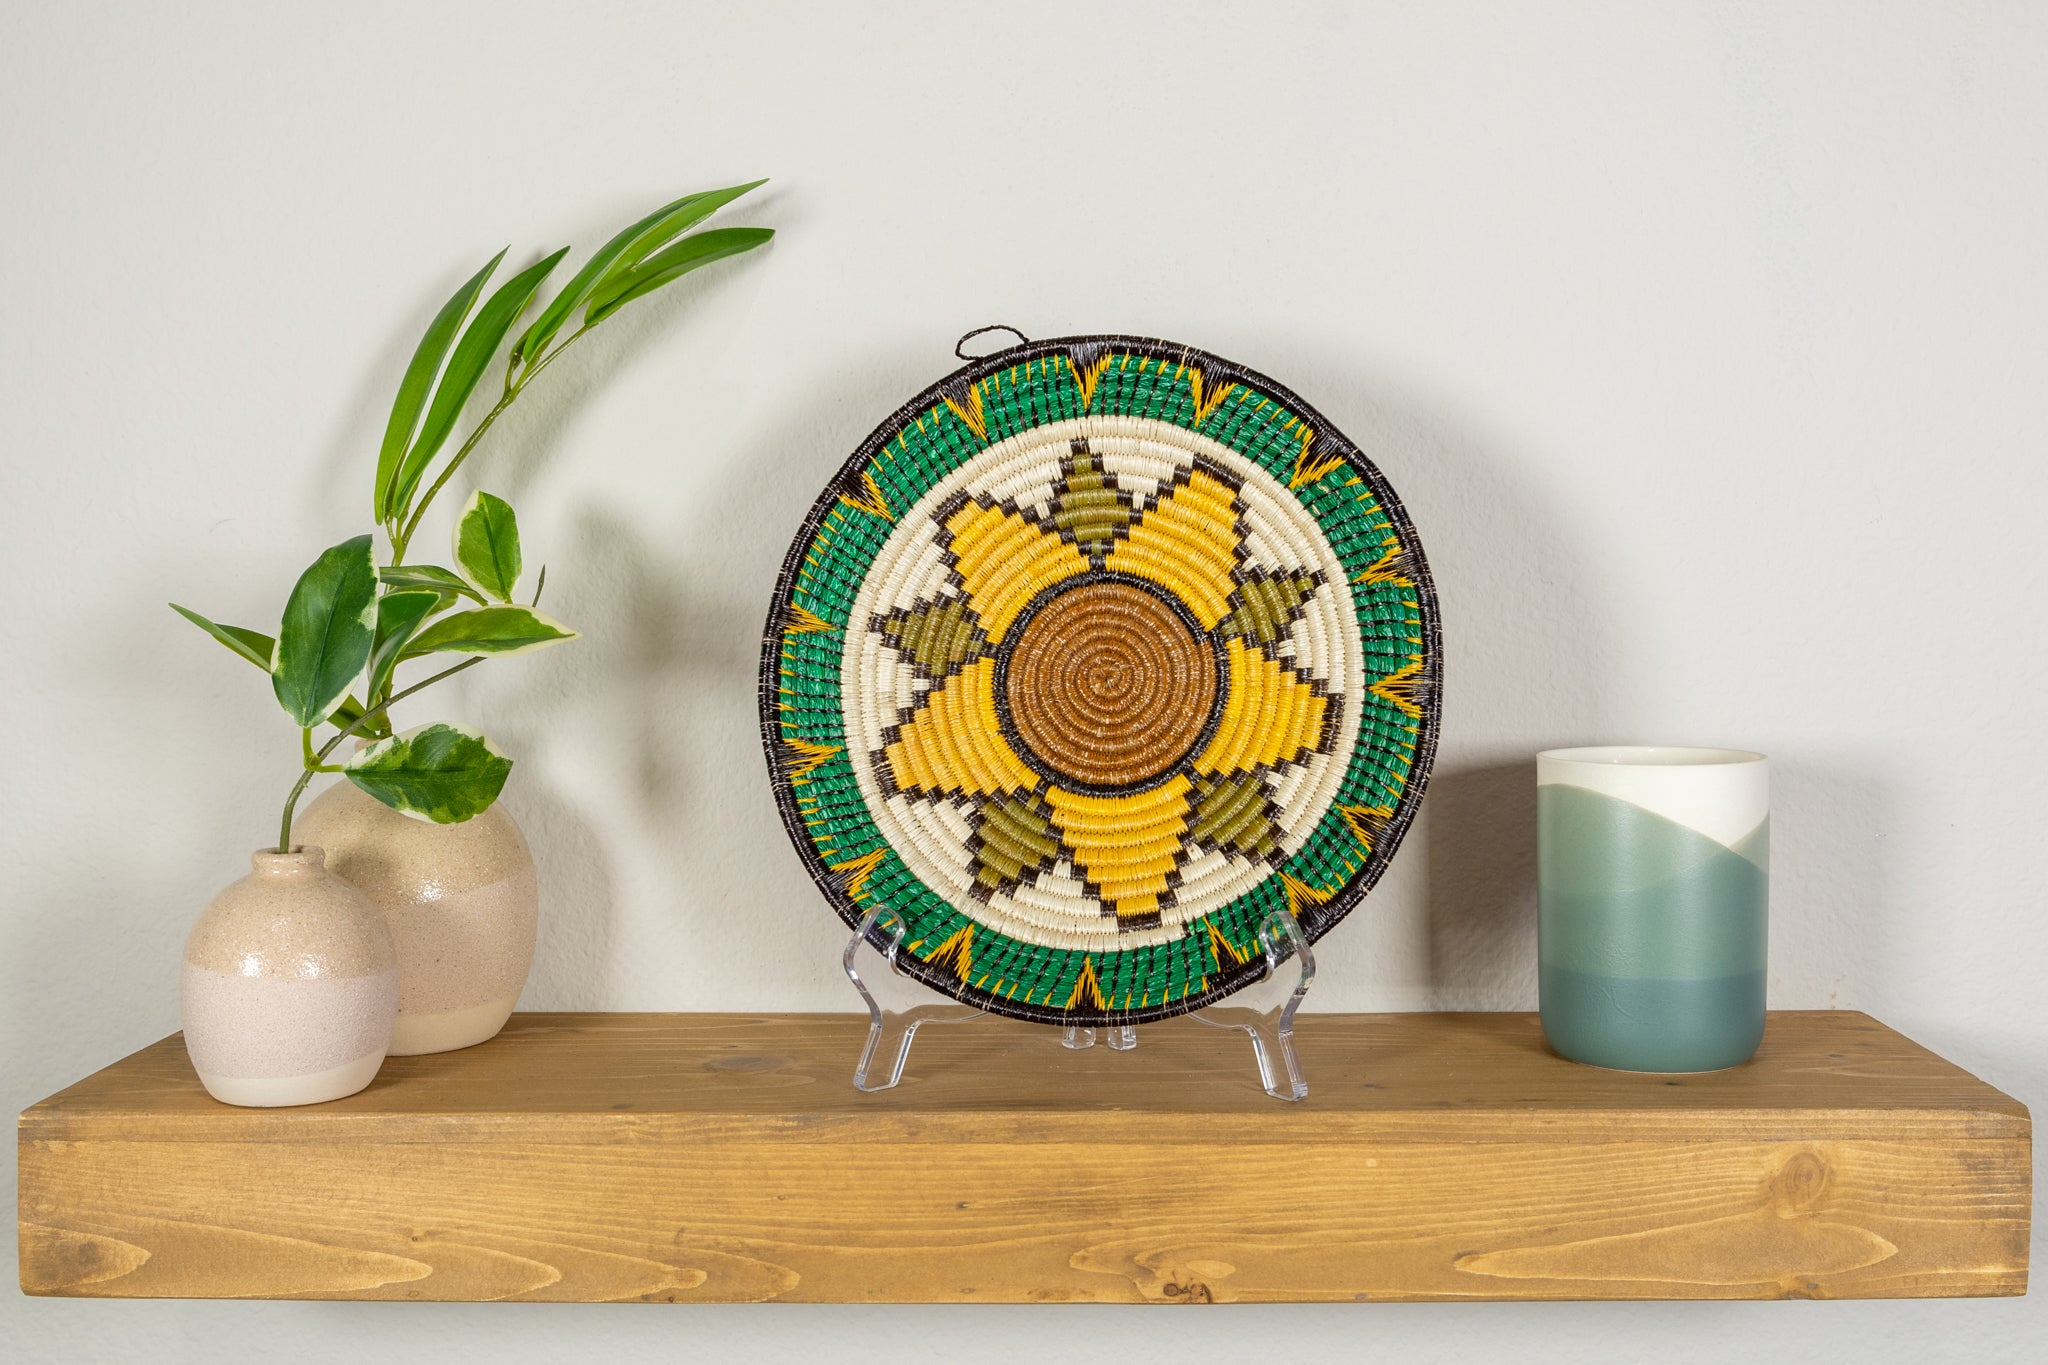 Green Gold And Brown Star Burst Basket Plate